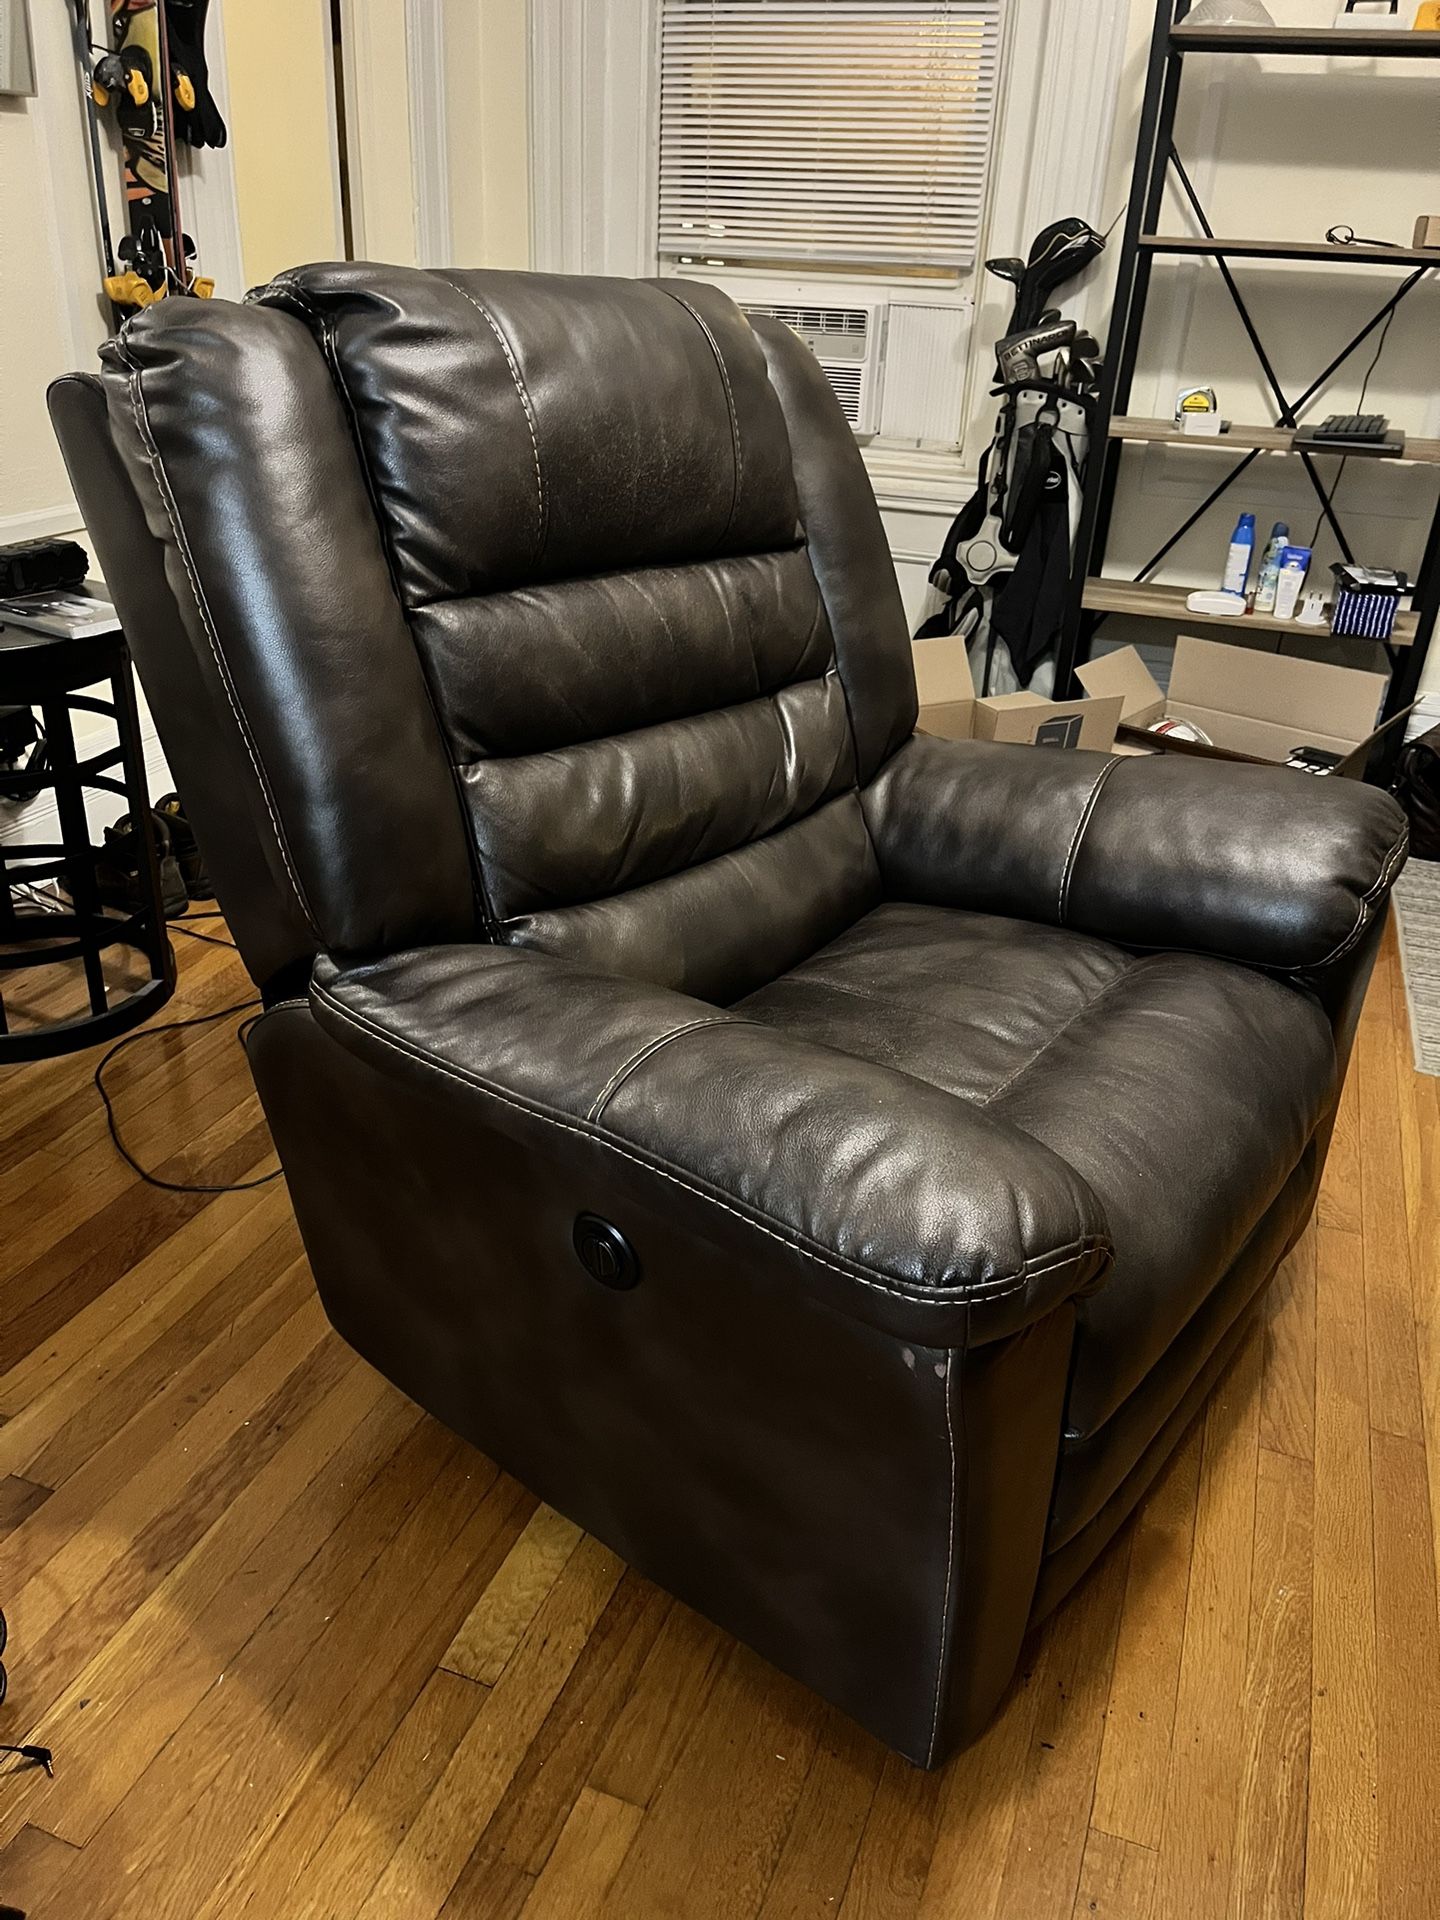 $150 - GREAT CONDITION Electric Leather Recliner